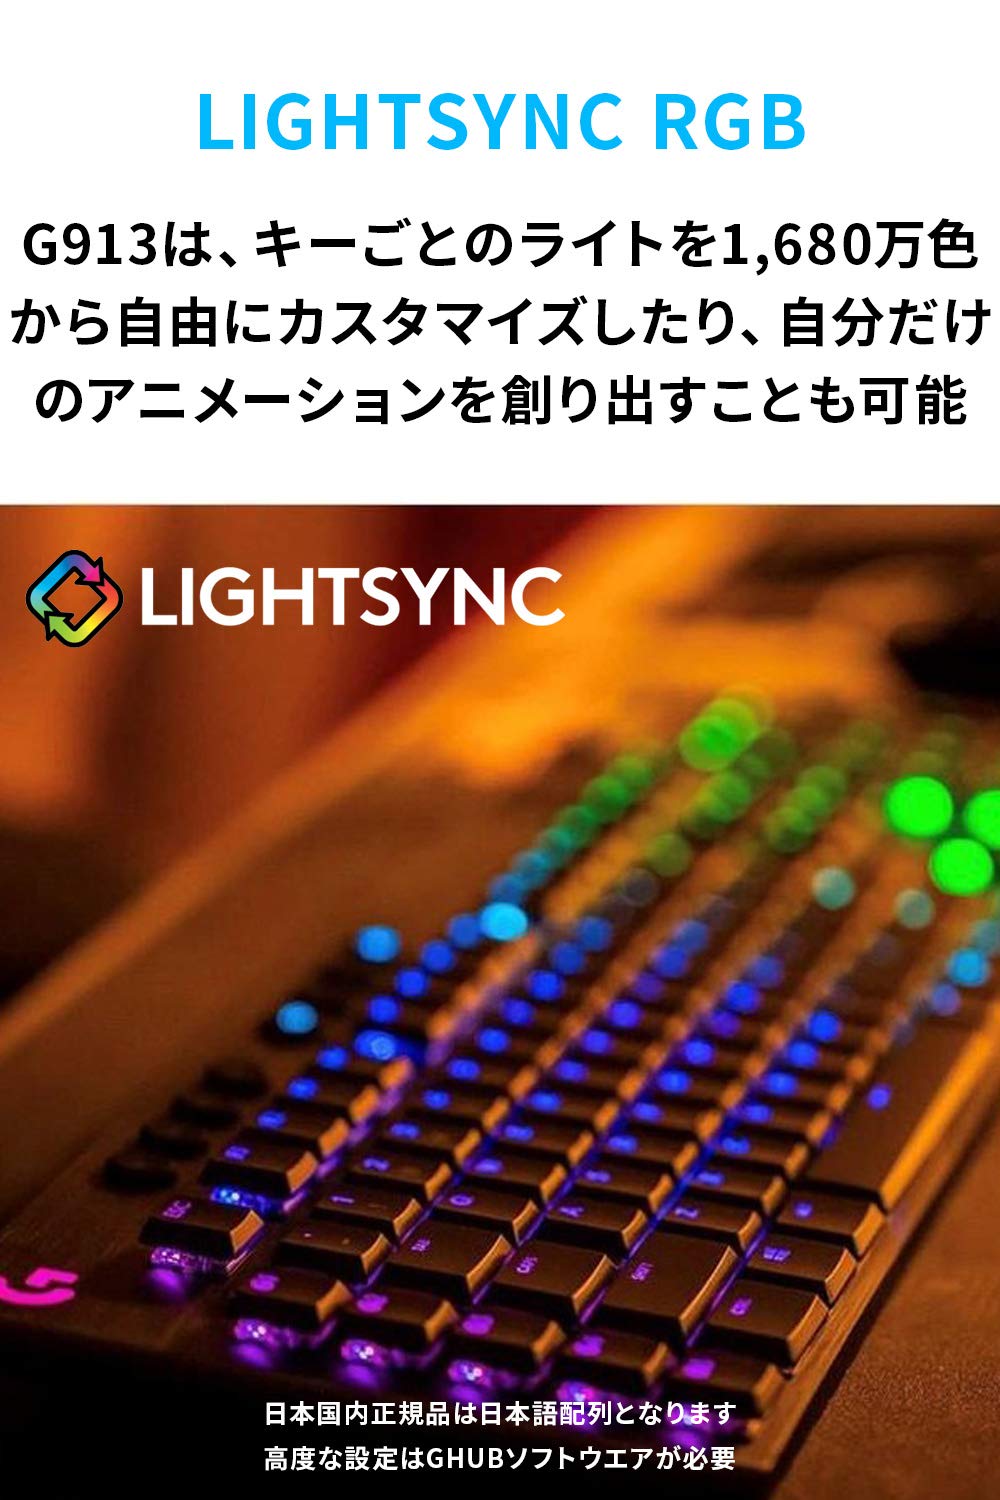 Logicool G G913-CK Gaming Keyboard, Wireless, Thin, GL Switches, Clicky, Mechanical Keyboard, Japanese Layout, LIGHTSPEED Wireless Bluetooth Connection Compatible, LIGHTSYNC RGB, Authentic Japanese Product, Recommended Peripheral for Final Fantasy XIV